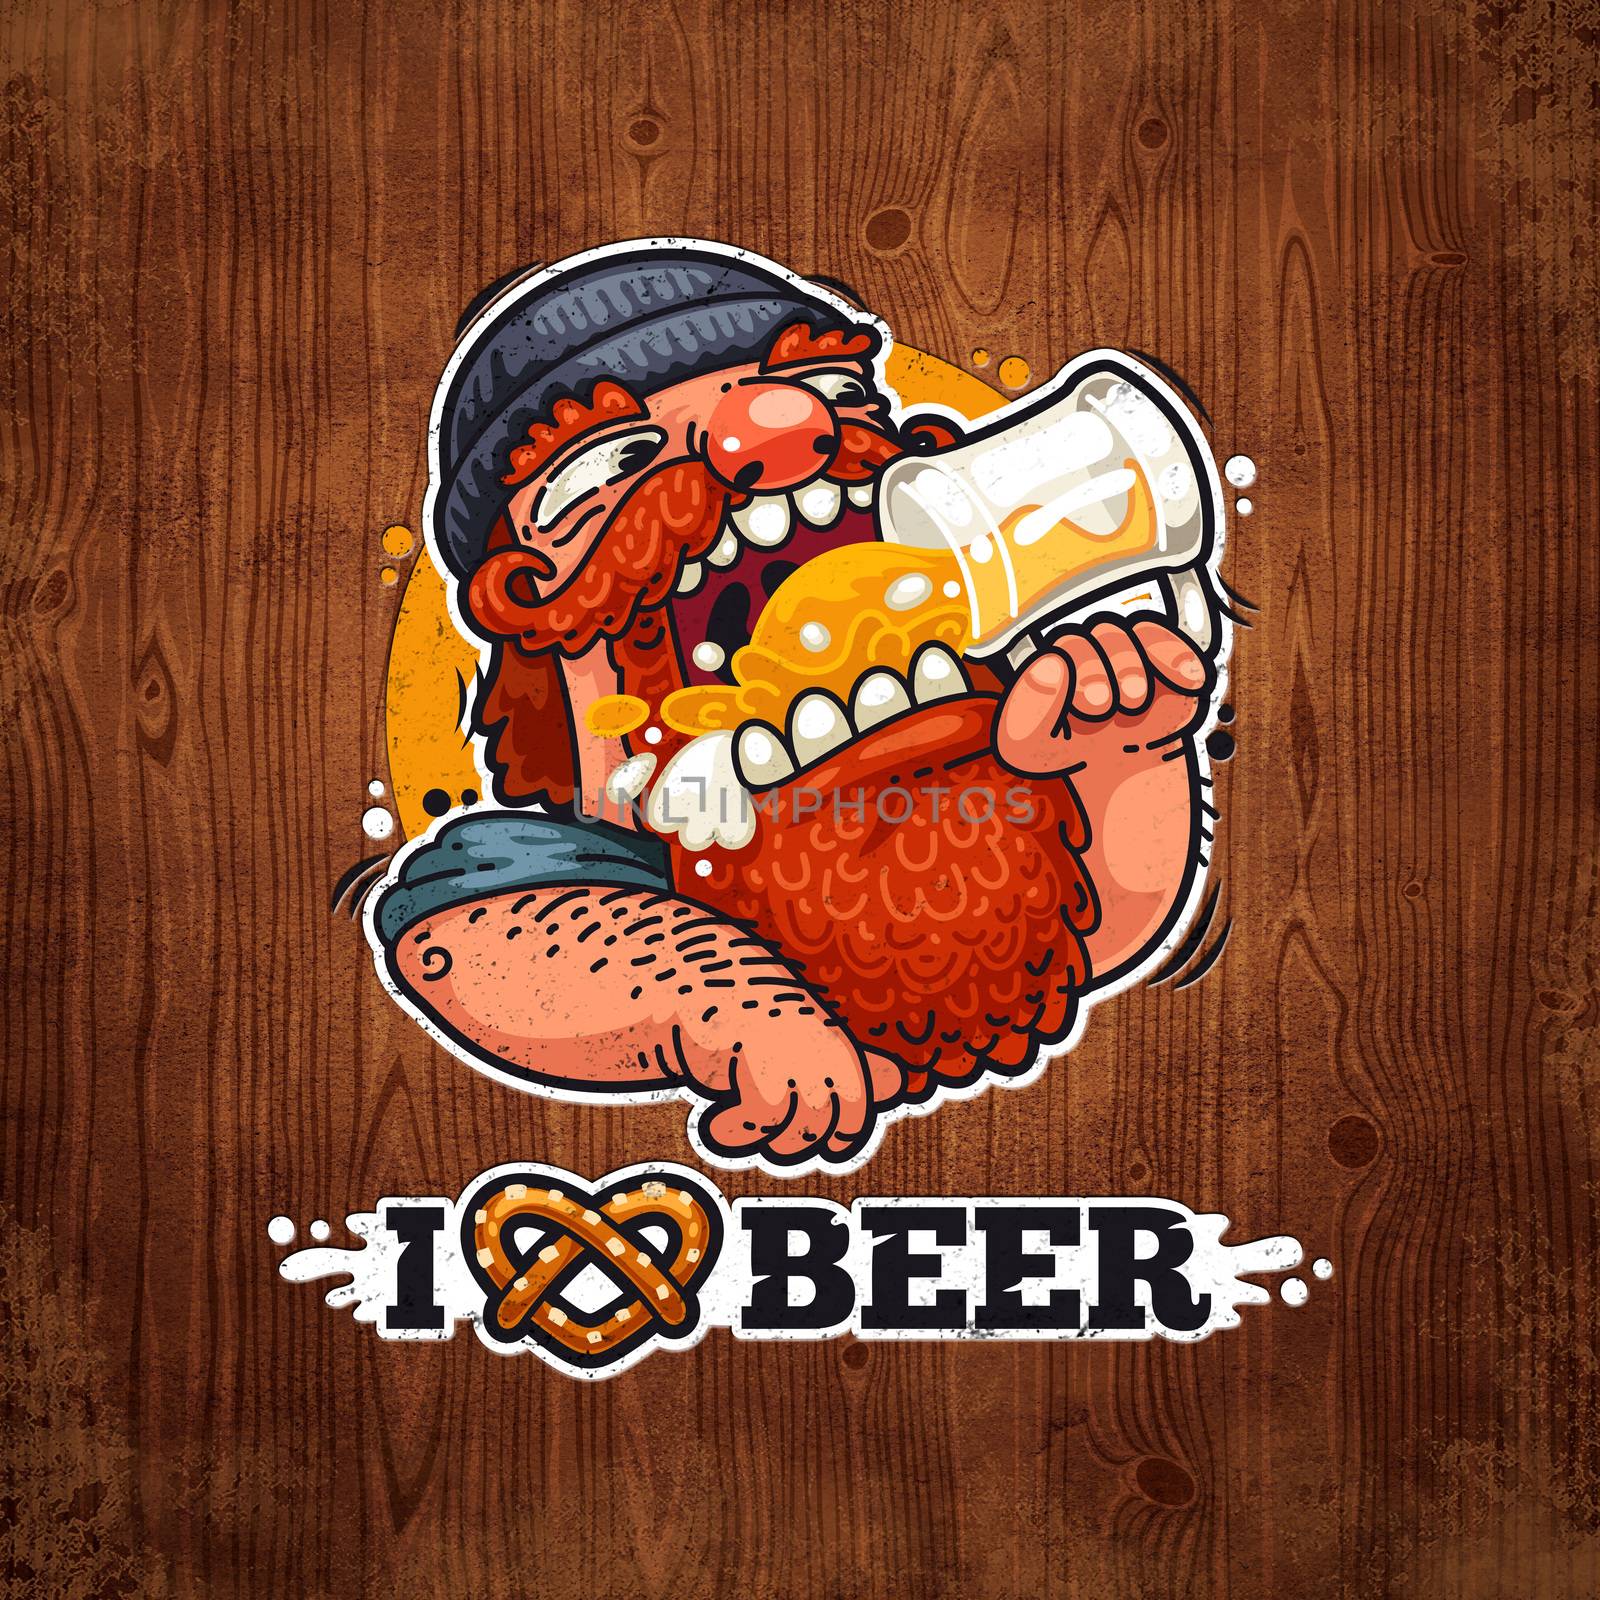 Man Loves Beer Poster. Clipping paths included.